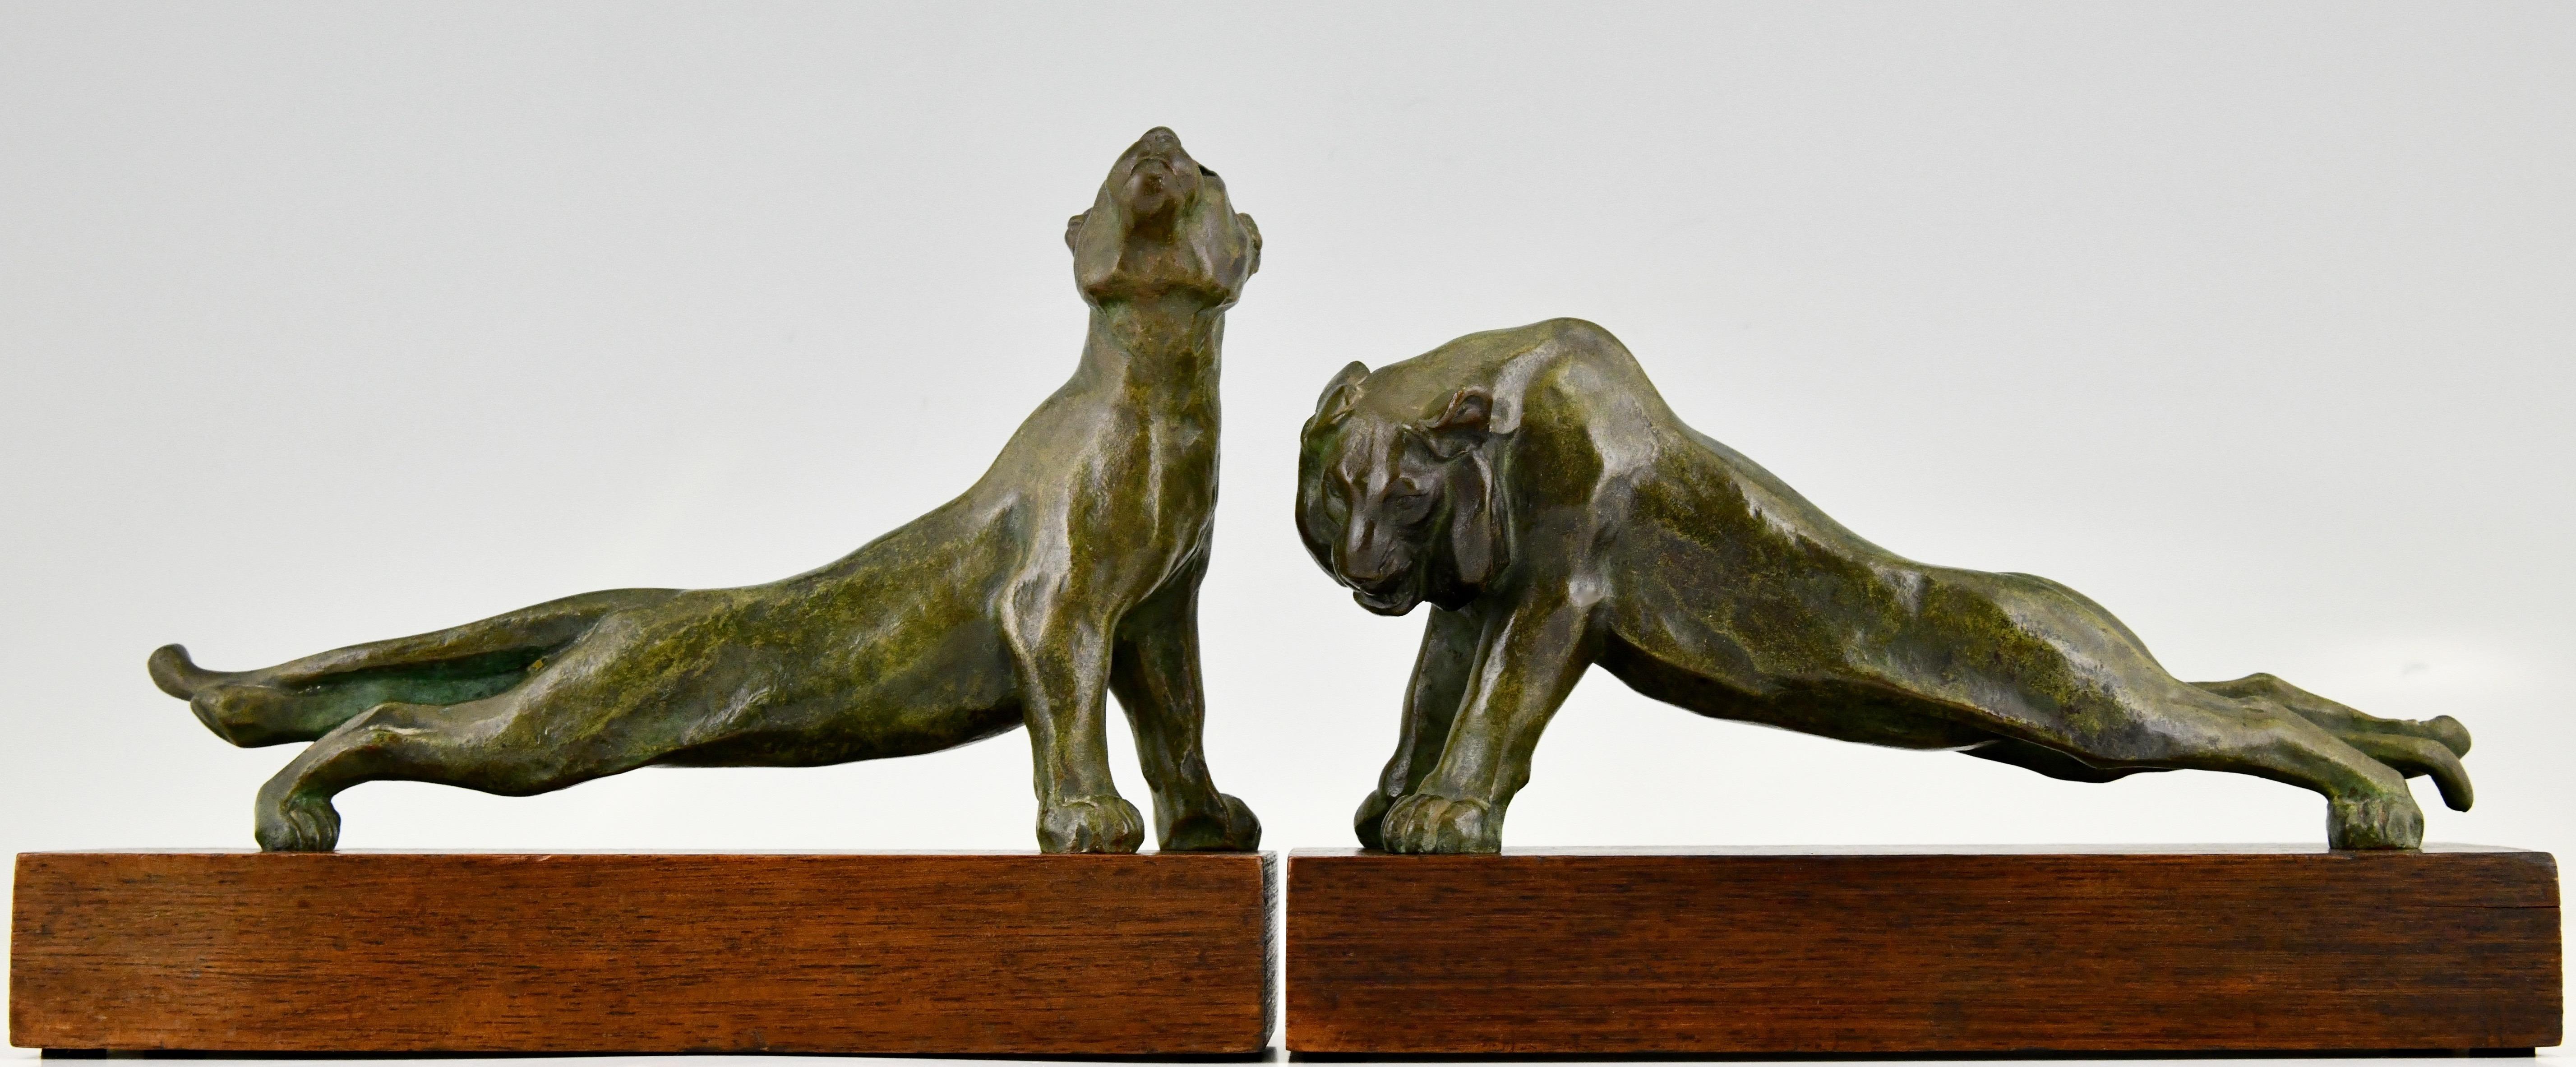 Art Deco bronze bookends panther and tiger by Oscar Waldmann Patinated bronze on wooden base. Signed on the base. circa 1925. Oscar Waldmann is a Swiss artist who worked in France.
This pair is illustrated in
Art Deco and other figures, Brian